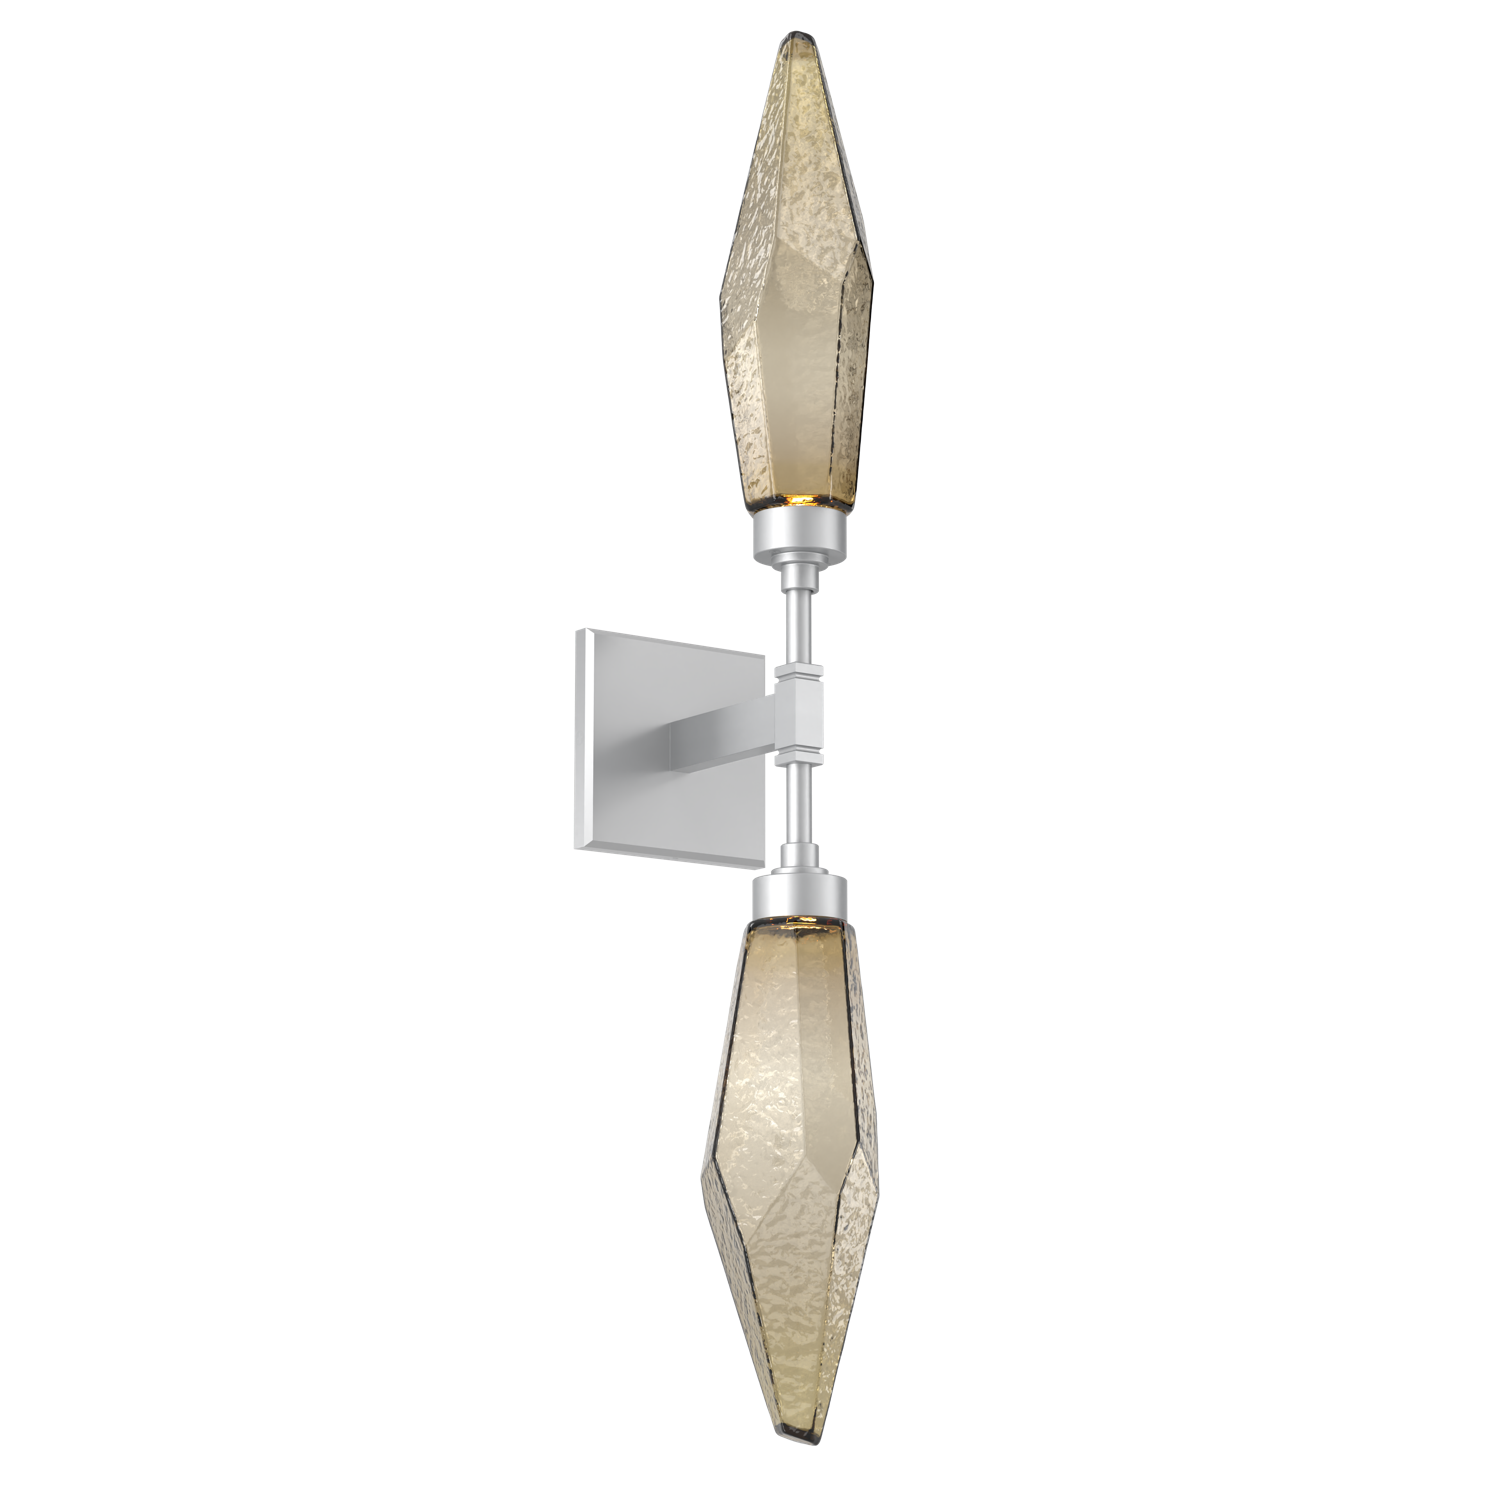 IDB0050-02-CS-CB-Hammerton-Studio-Rock-Crystal-wall-sconce-with-classic-silver-finish-and-chilled-bronze-blown-glass-shades-and-LED-lamping